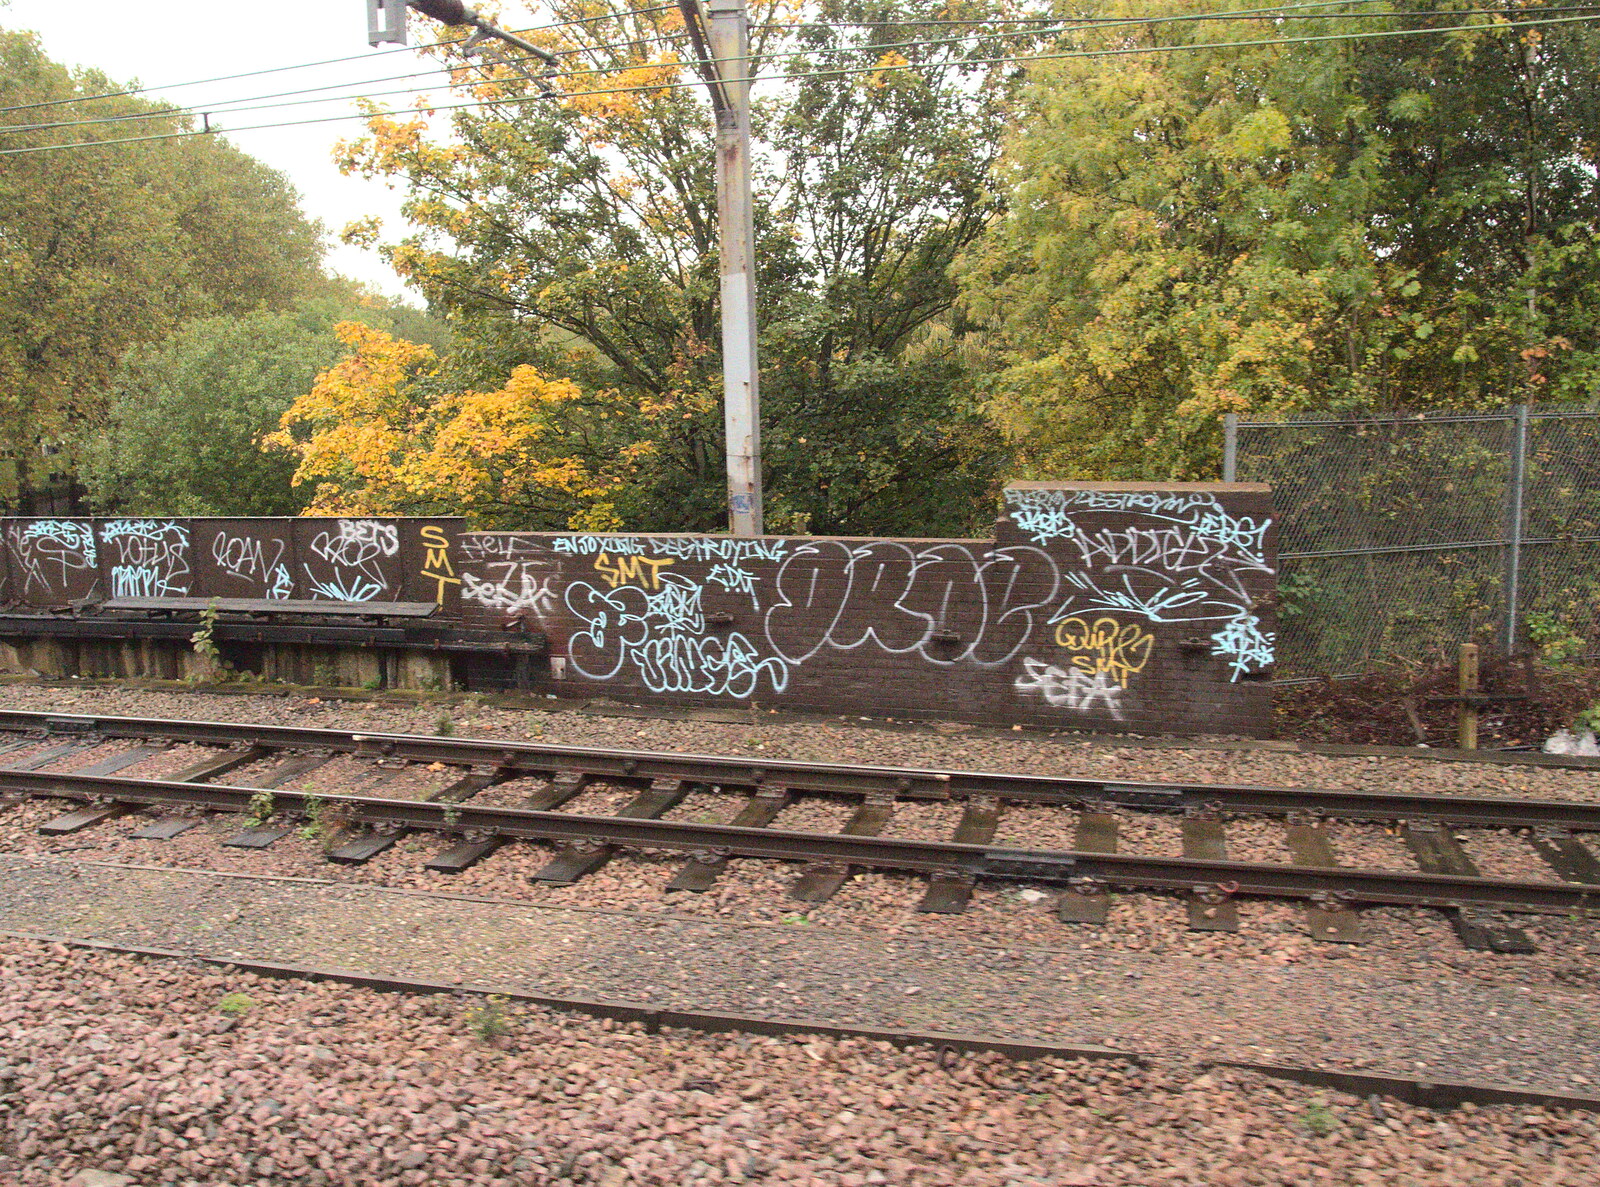 Trackside graffiti from Fred's Gyrobot, Brome, Suffolk - 18th October 2015